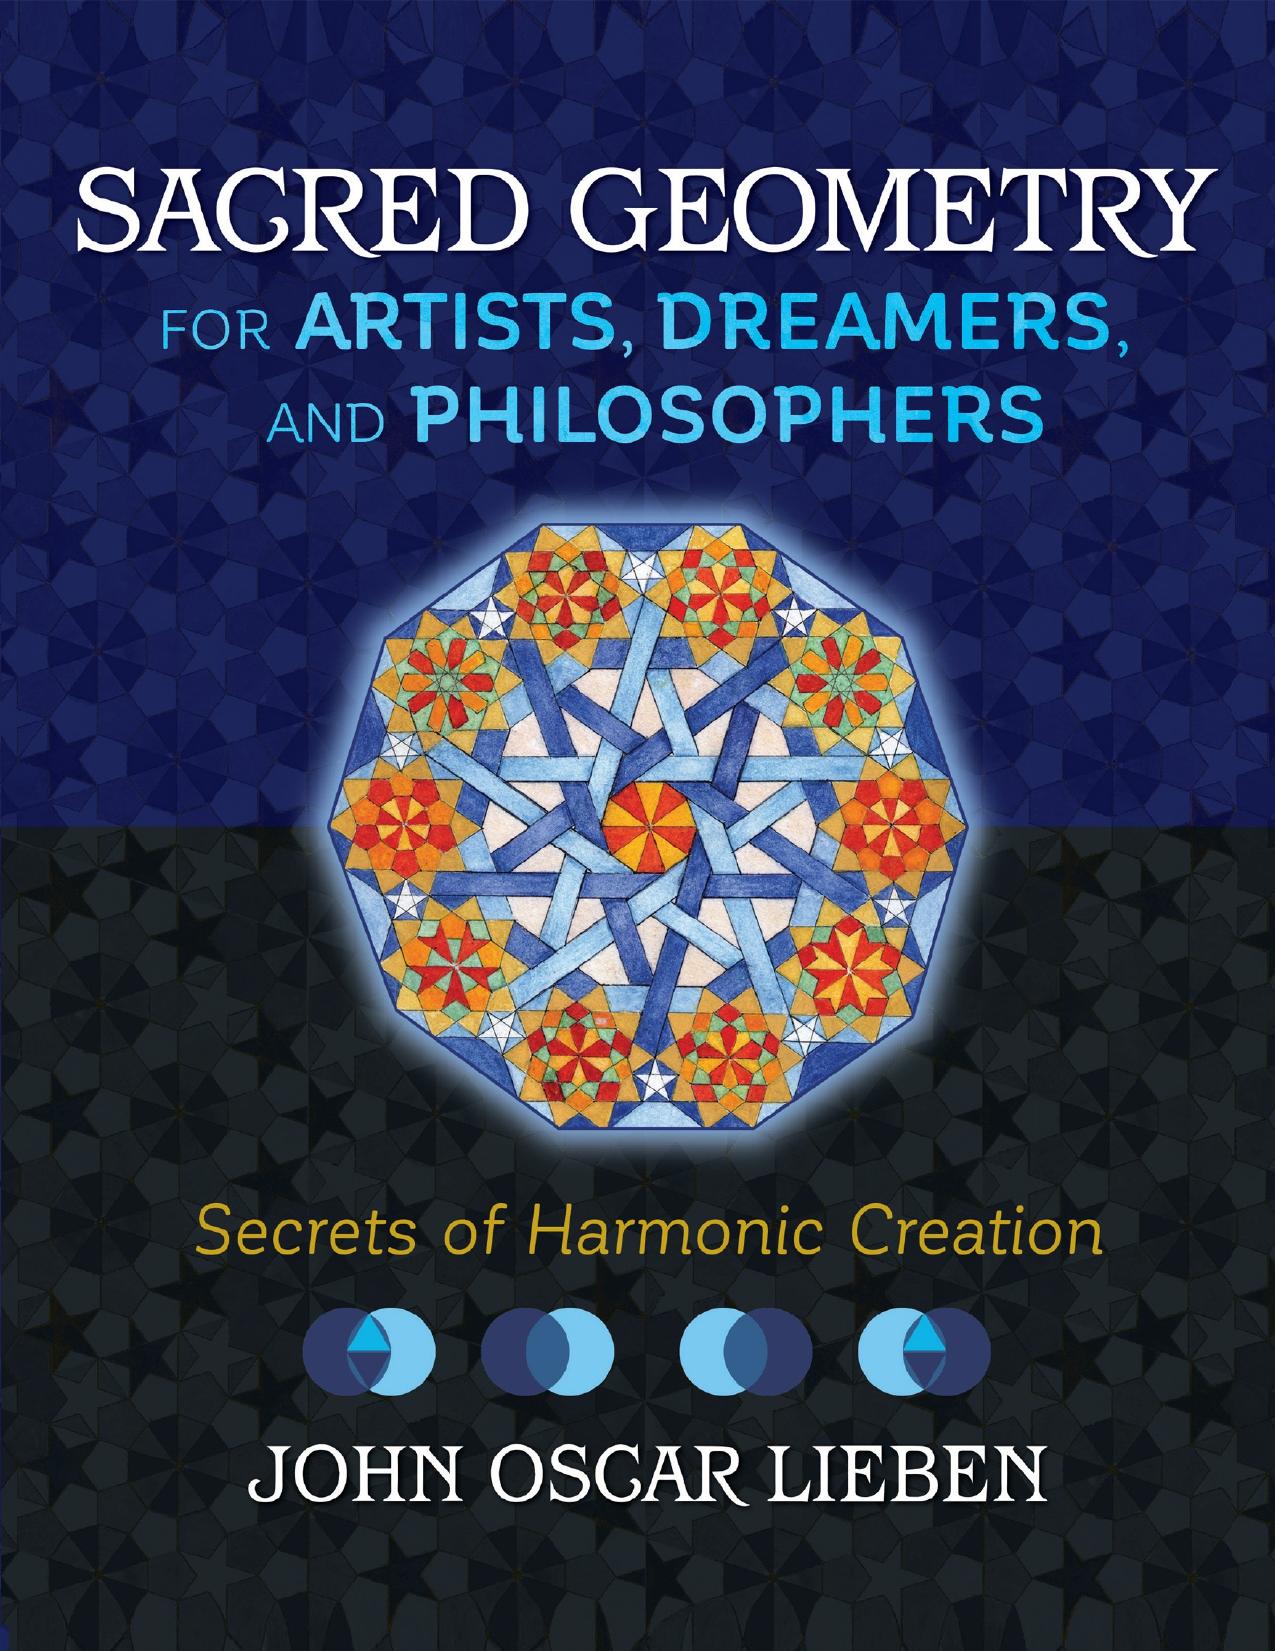 Sacred Geometry for Artists, Dreamers, and Philosophers: Secrets of Harmonic Creation - PDFDrive.com